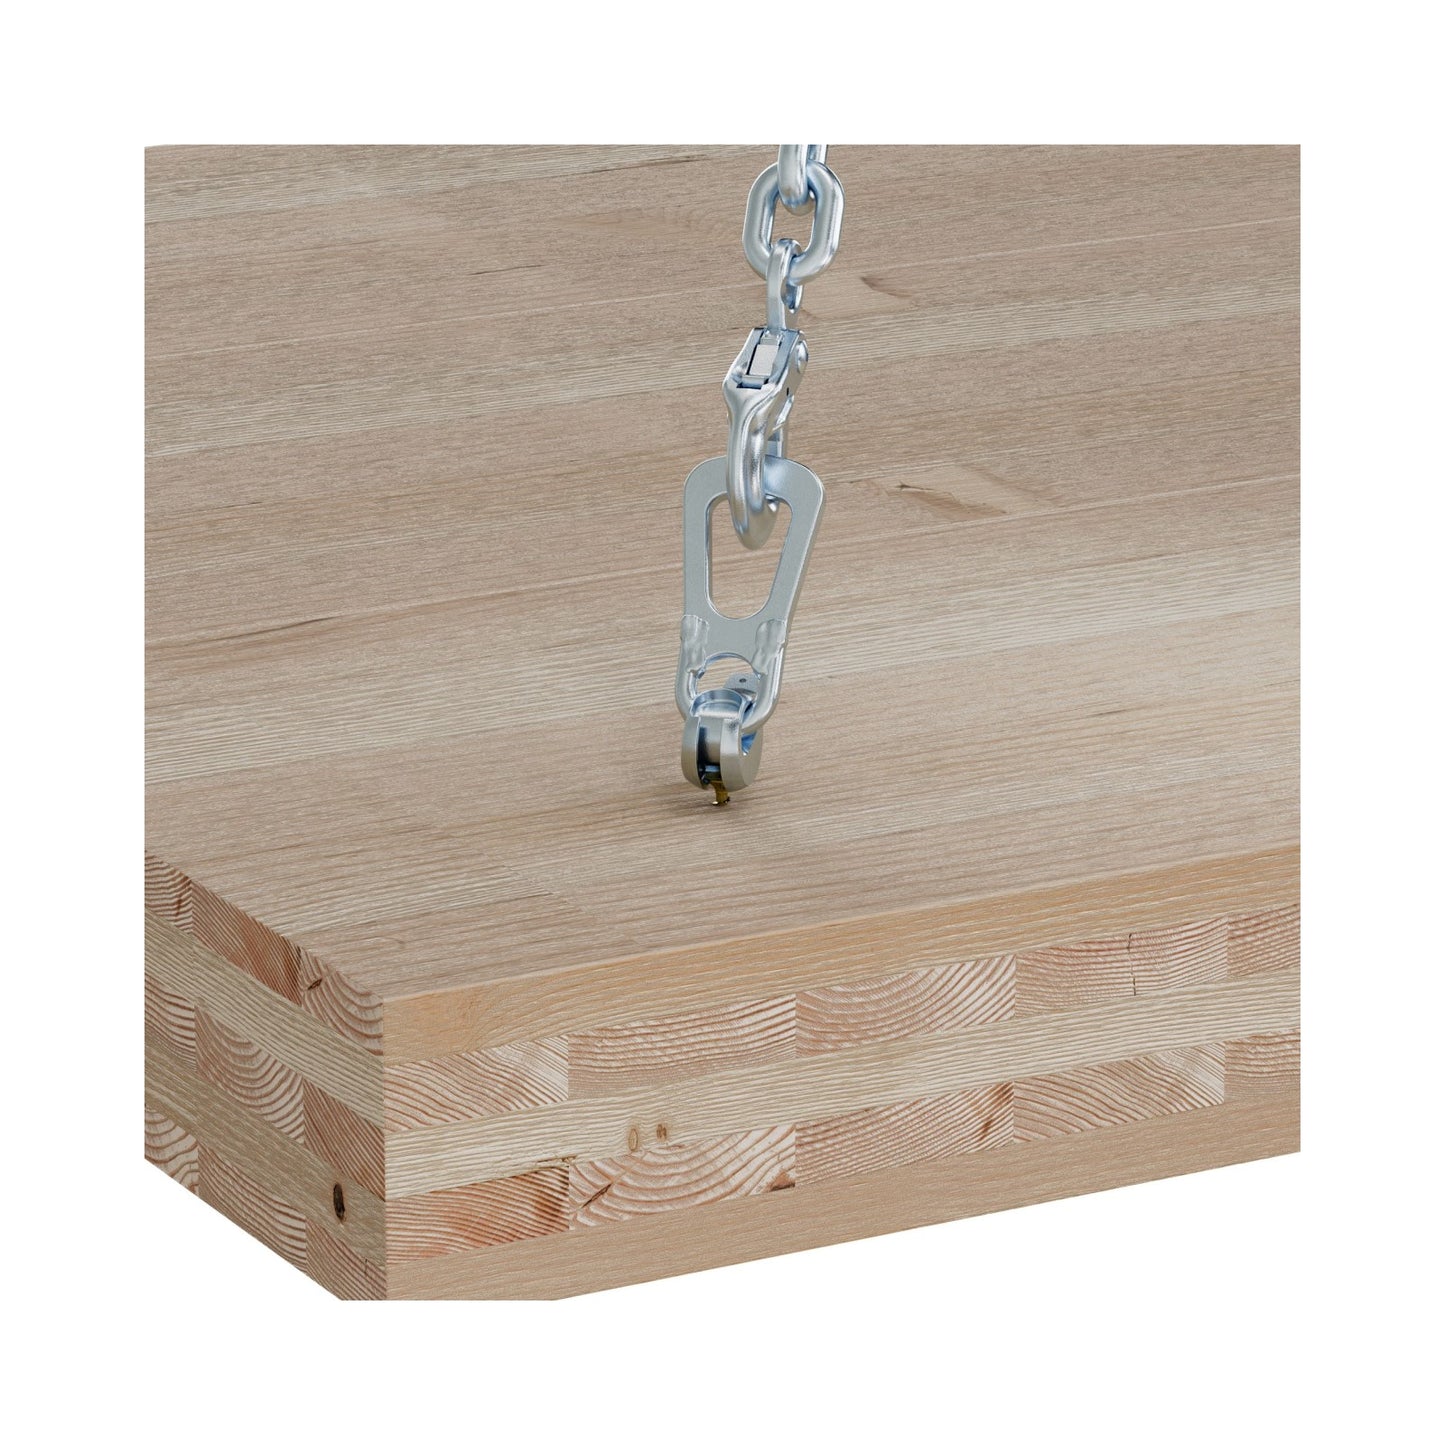 Simpson Strong-Tie MTLD Mass Timber Lifting Anchor